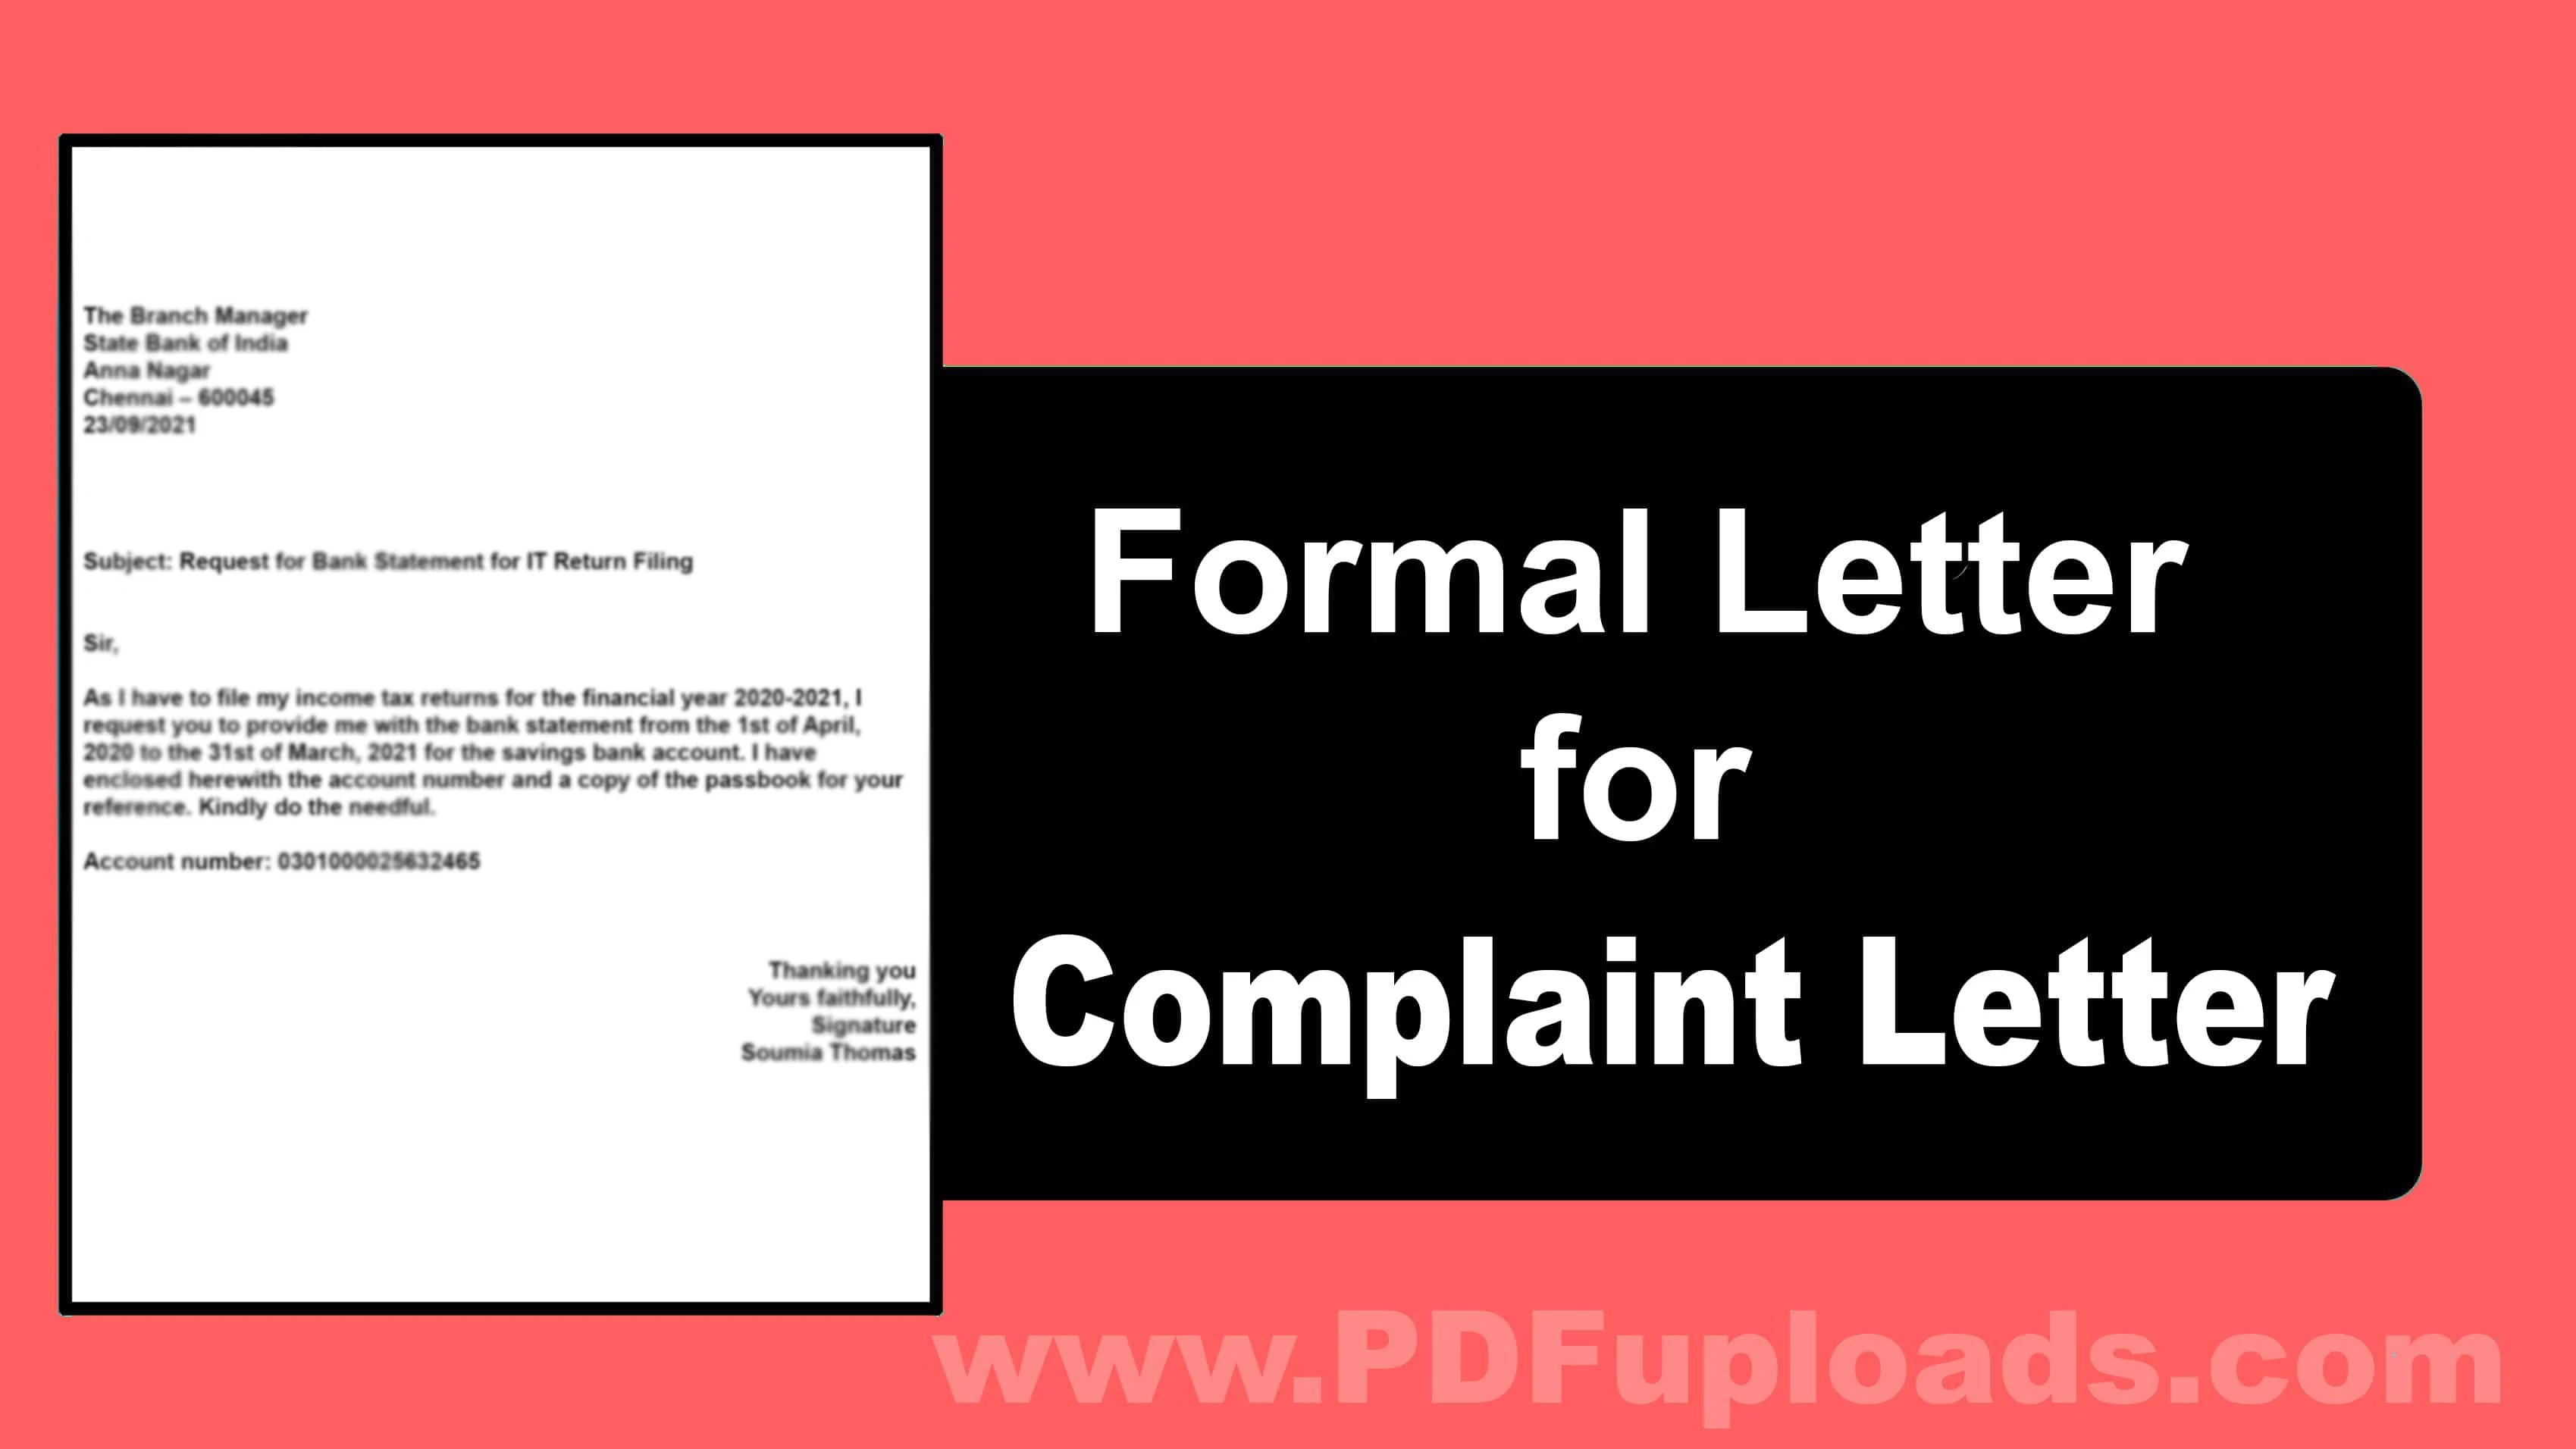 Complaint Letter Format - How to Write Formal letter with Examples